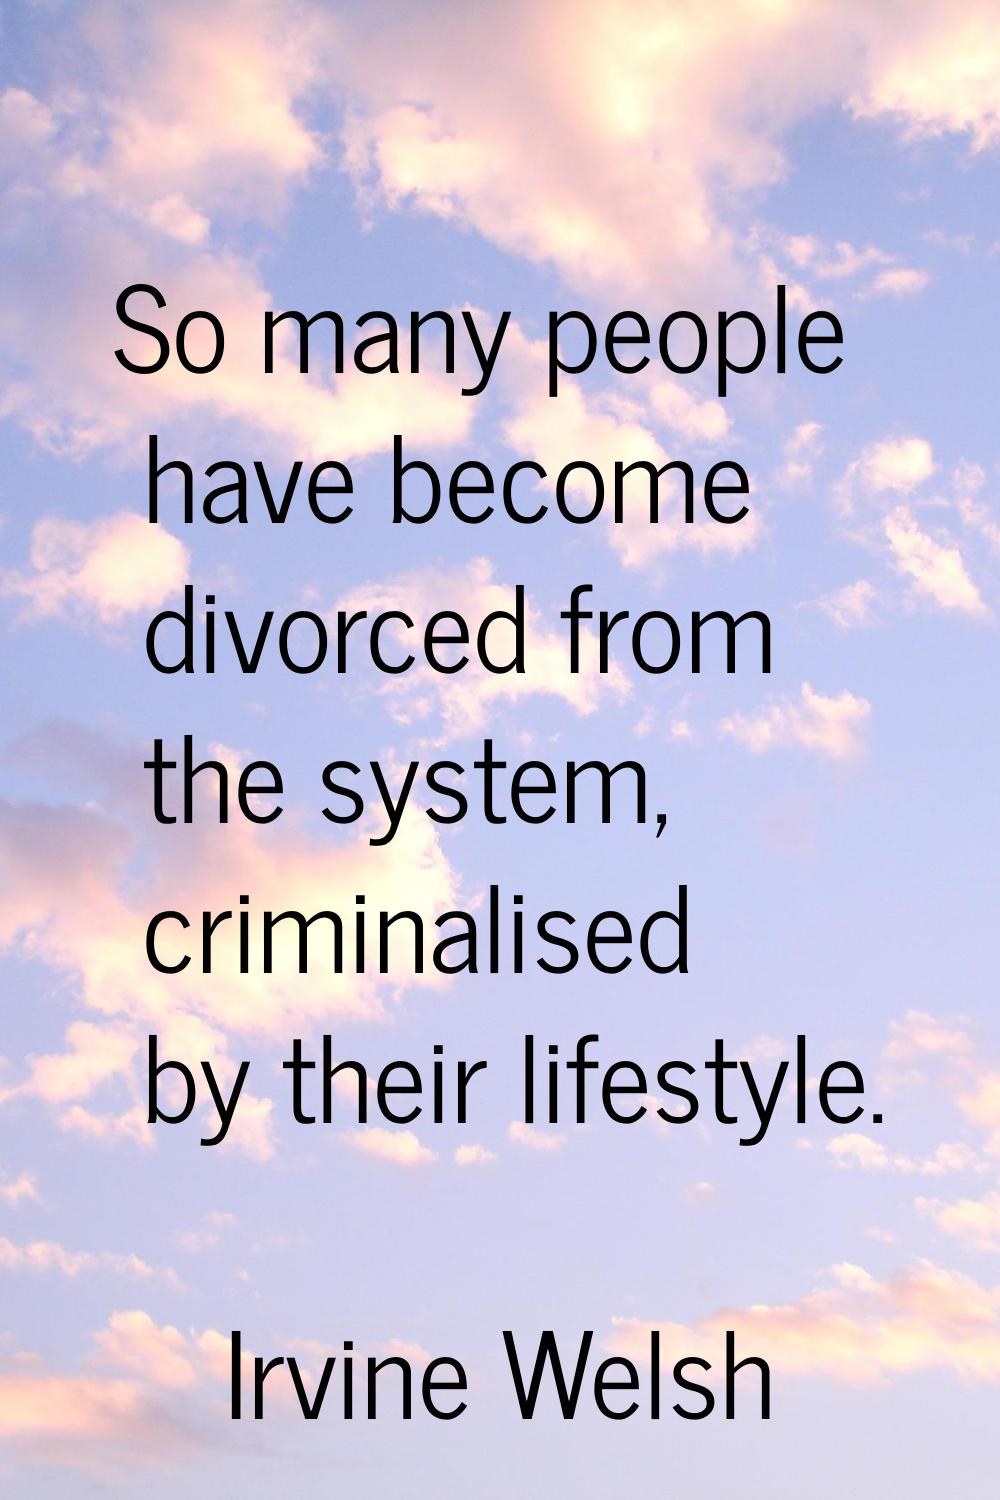 So many people have become divorced from the system, criminalised by their lifestyle.